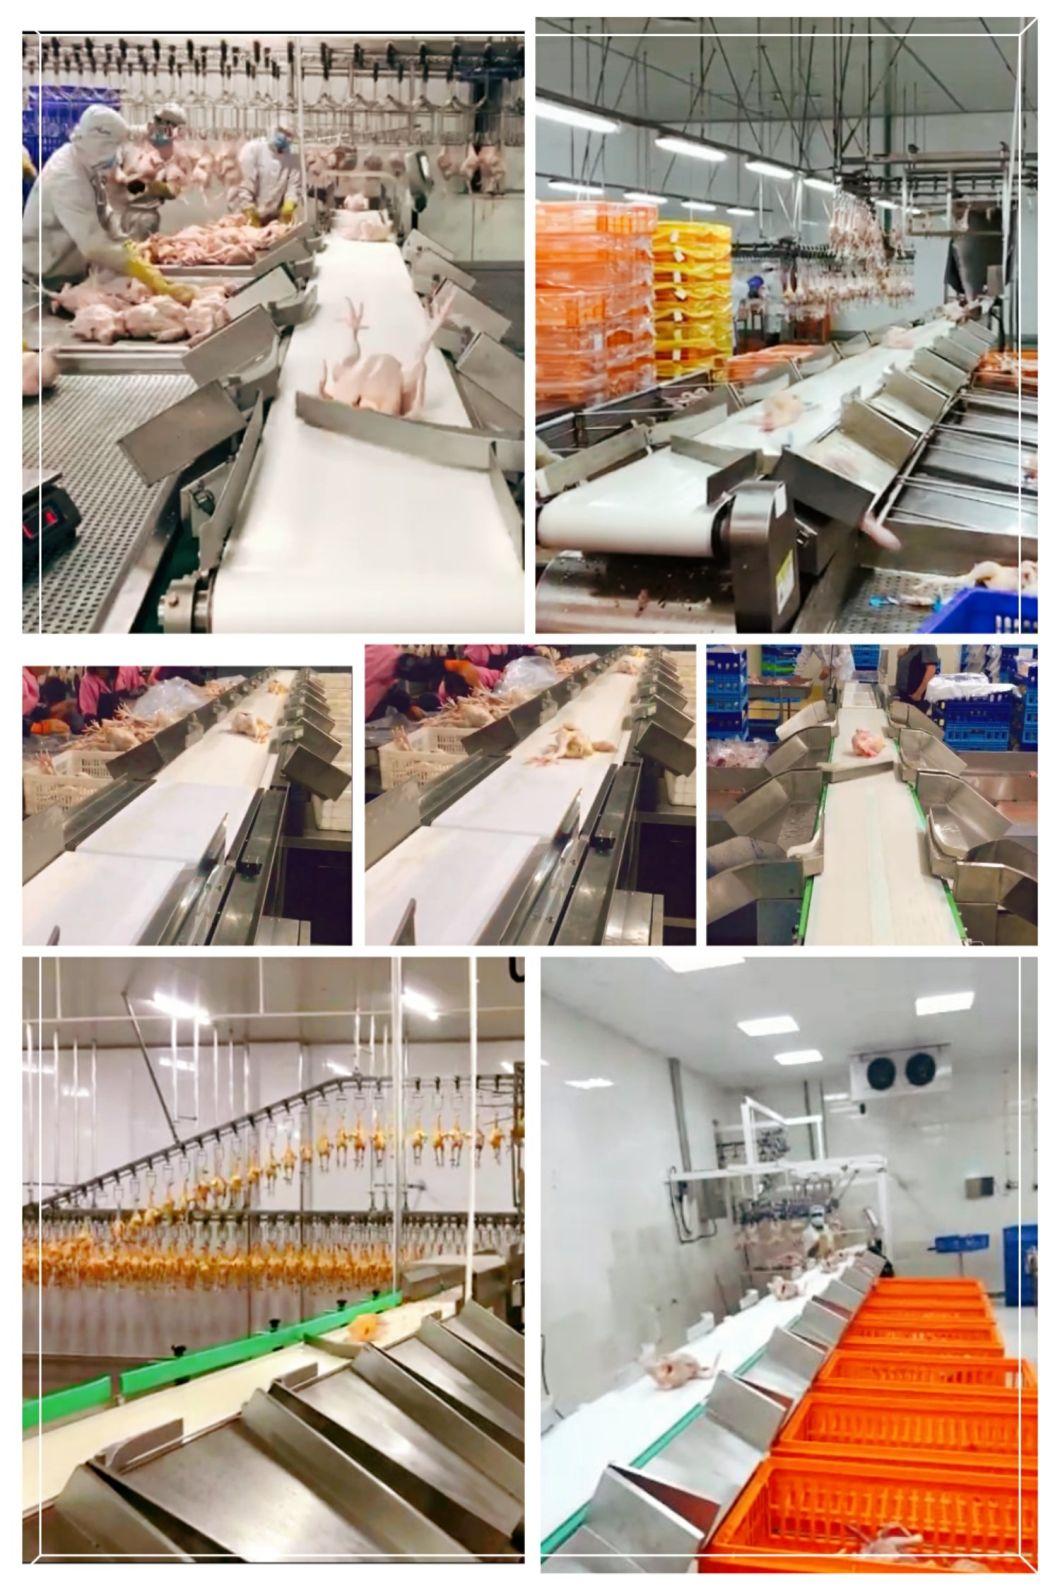 Export to South America Weight Sorting Machine for Whole Chickens & Griller & Carcass